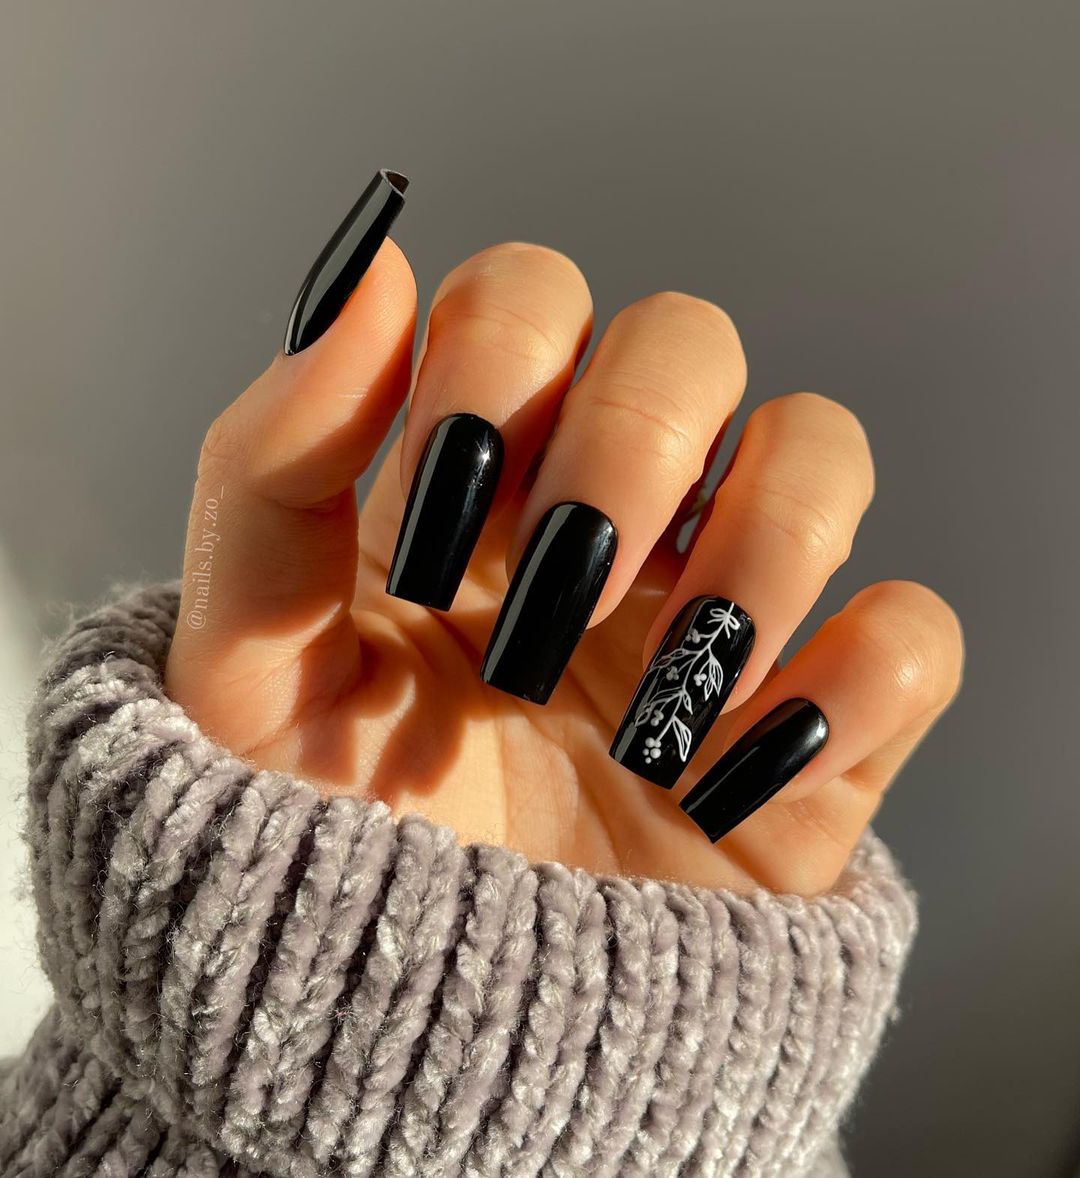 Black Square Nails with White Floral Design